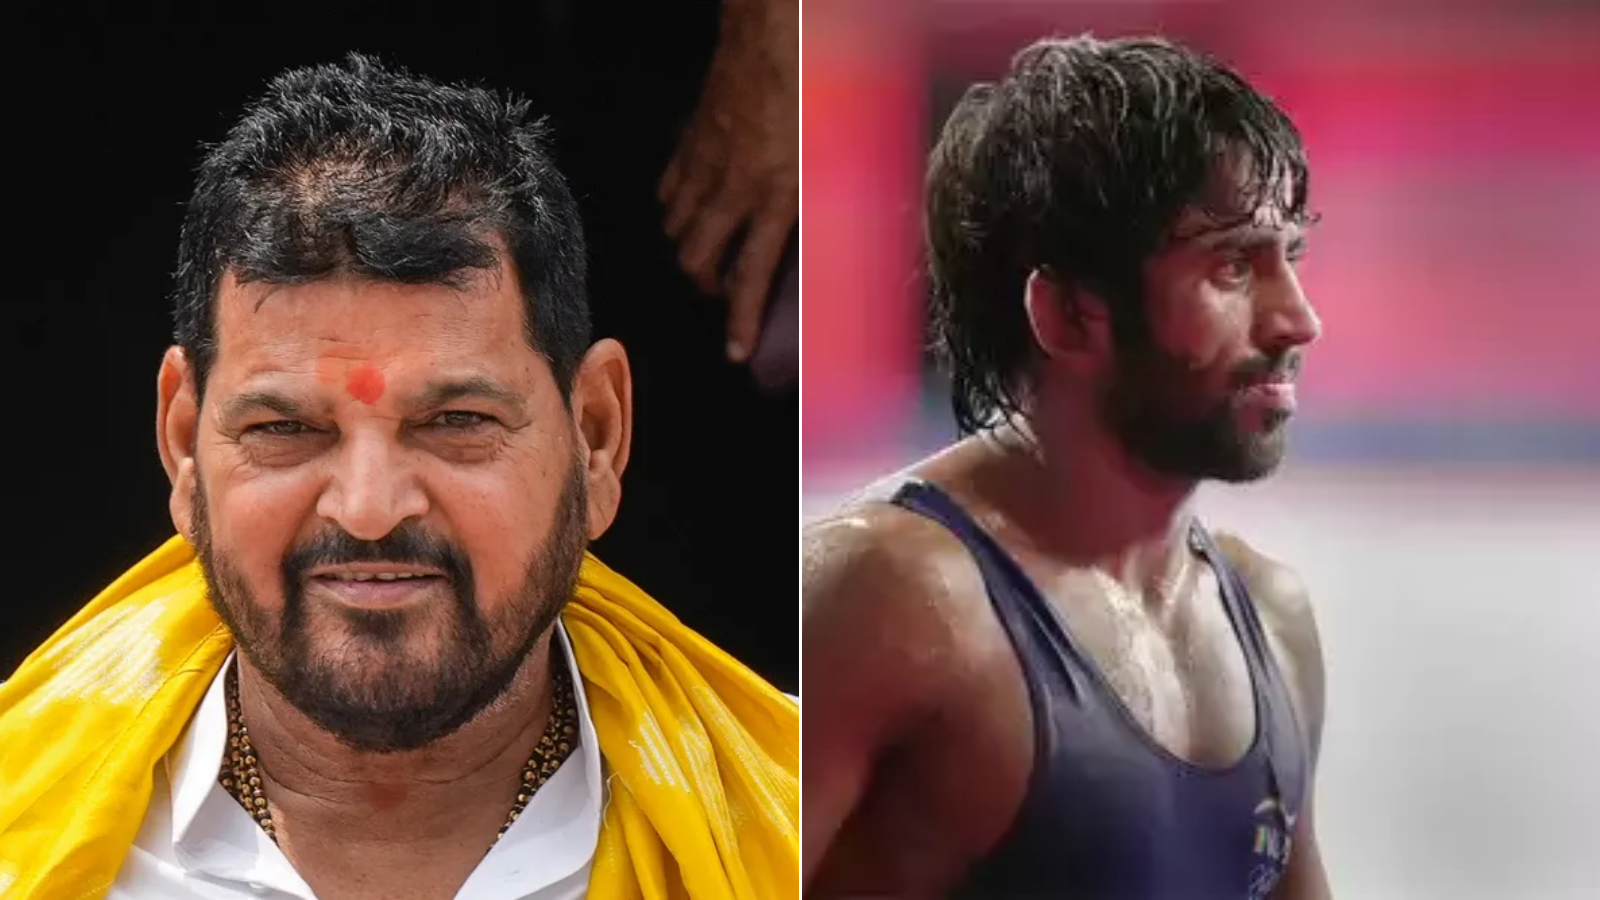 android, bjp fields brij bhushan’s son, wrestler bajrang says ‘power will remain with father’ and ‘bjp does not care about the safety of women’